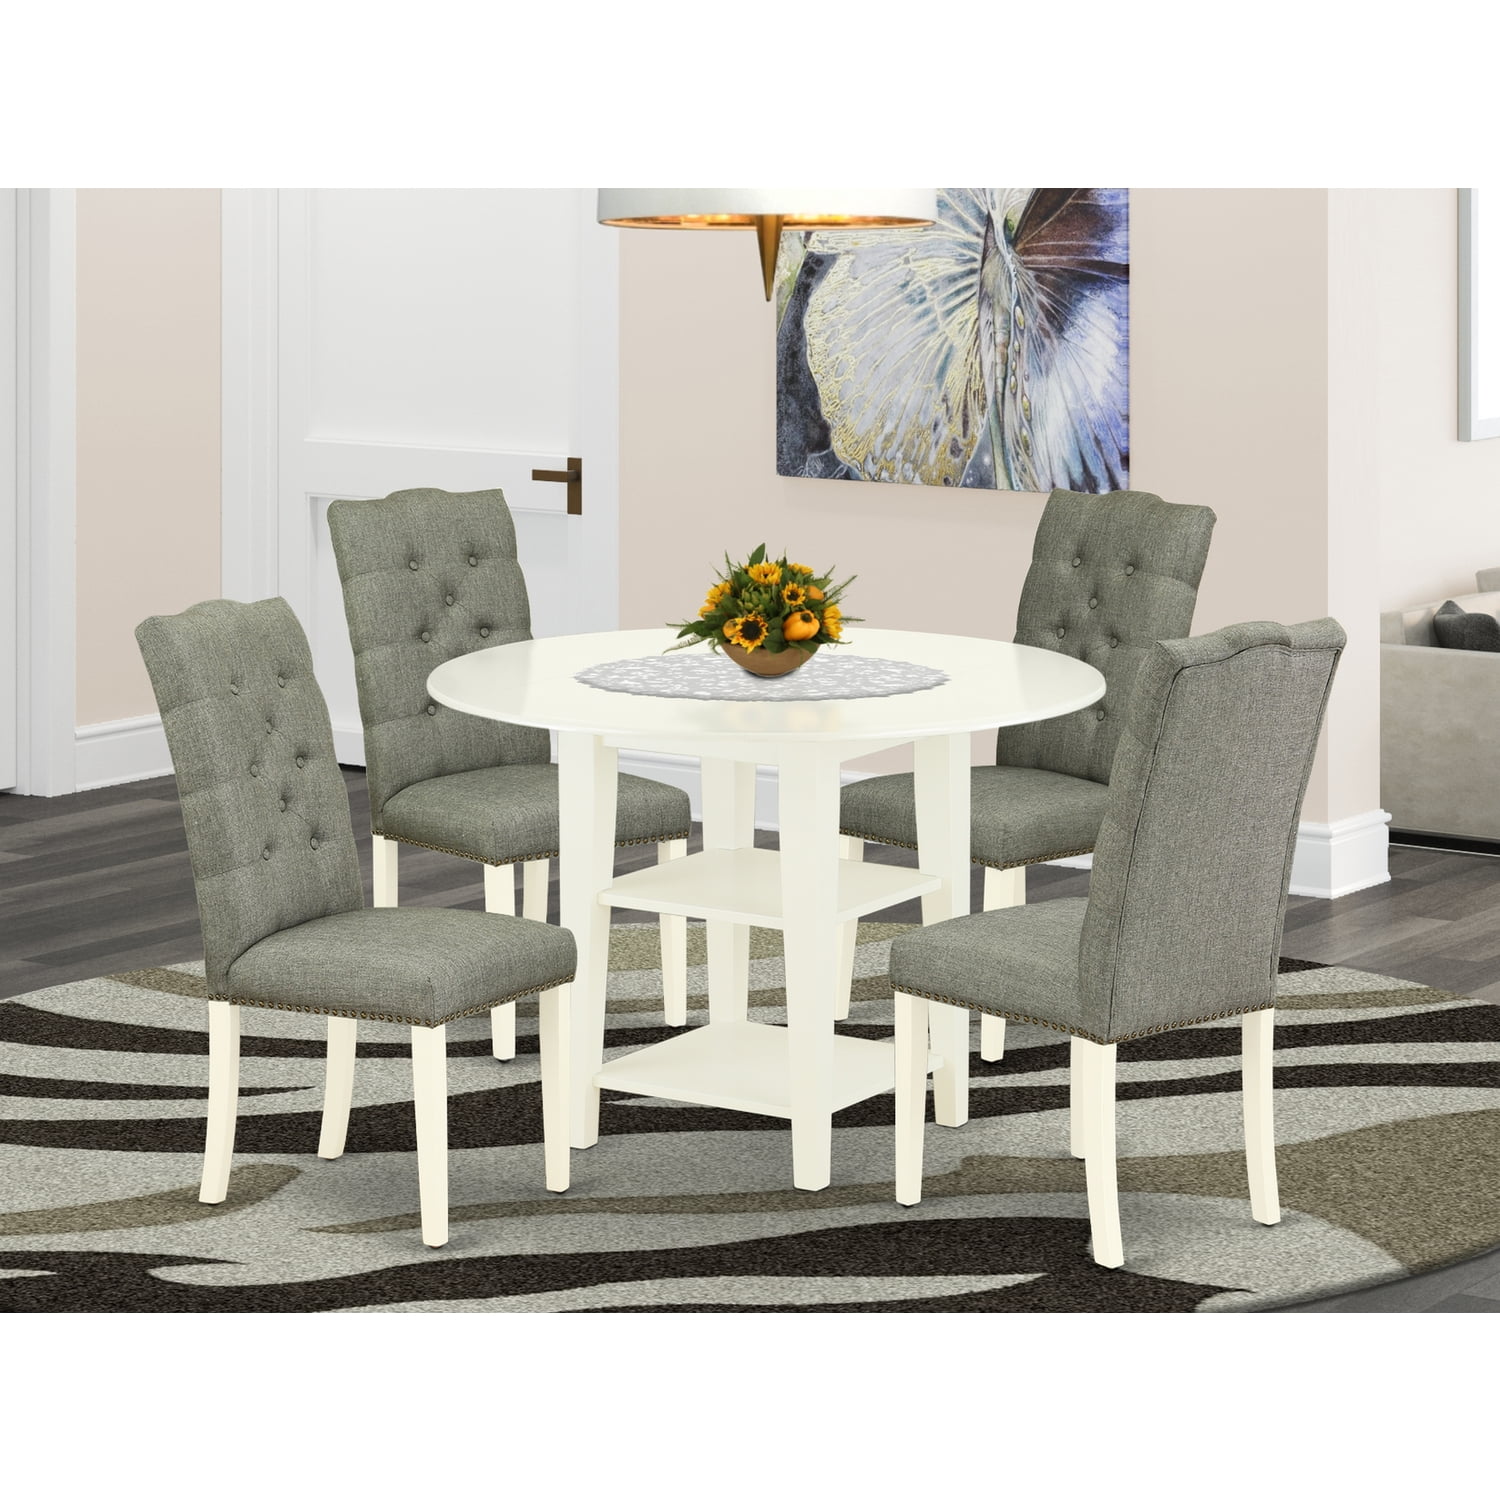 5 Piece Dining Table Set, Small Round Dining Table Set For 4